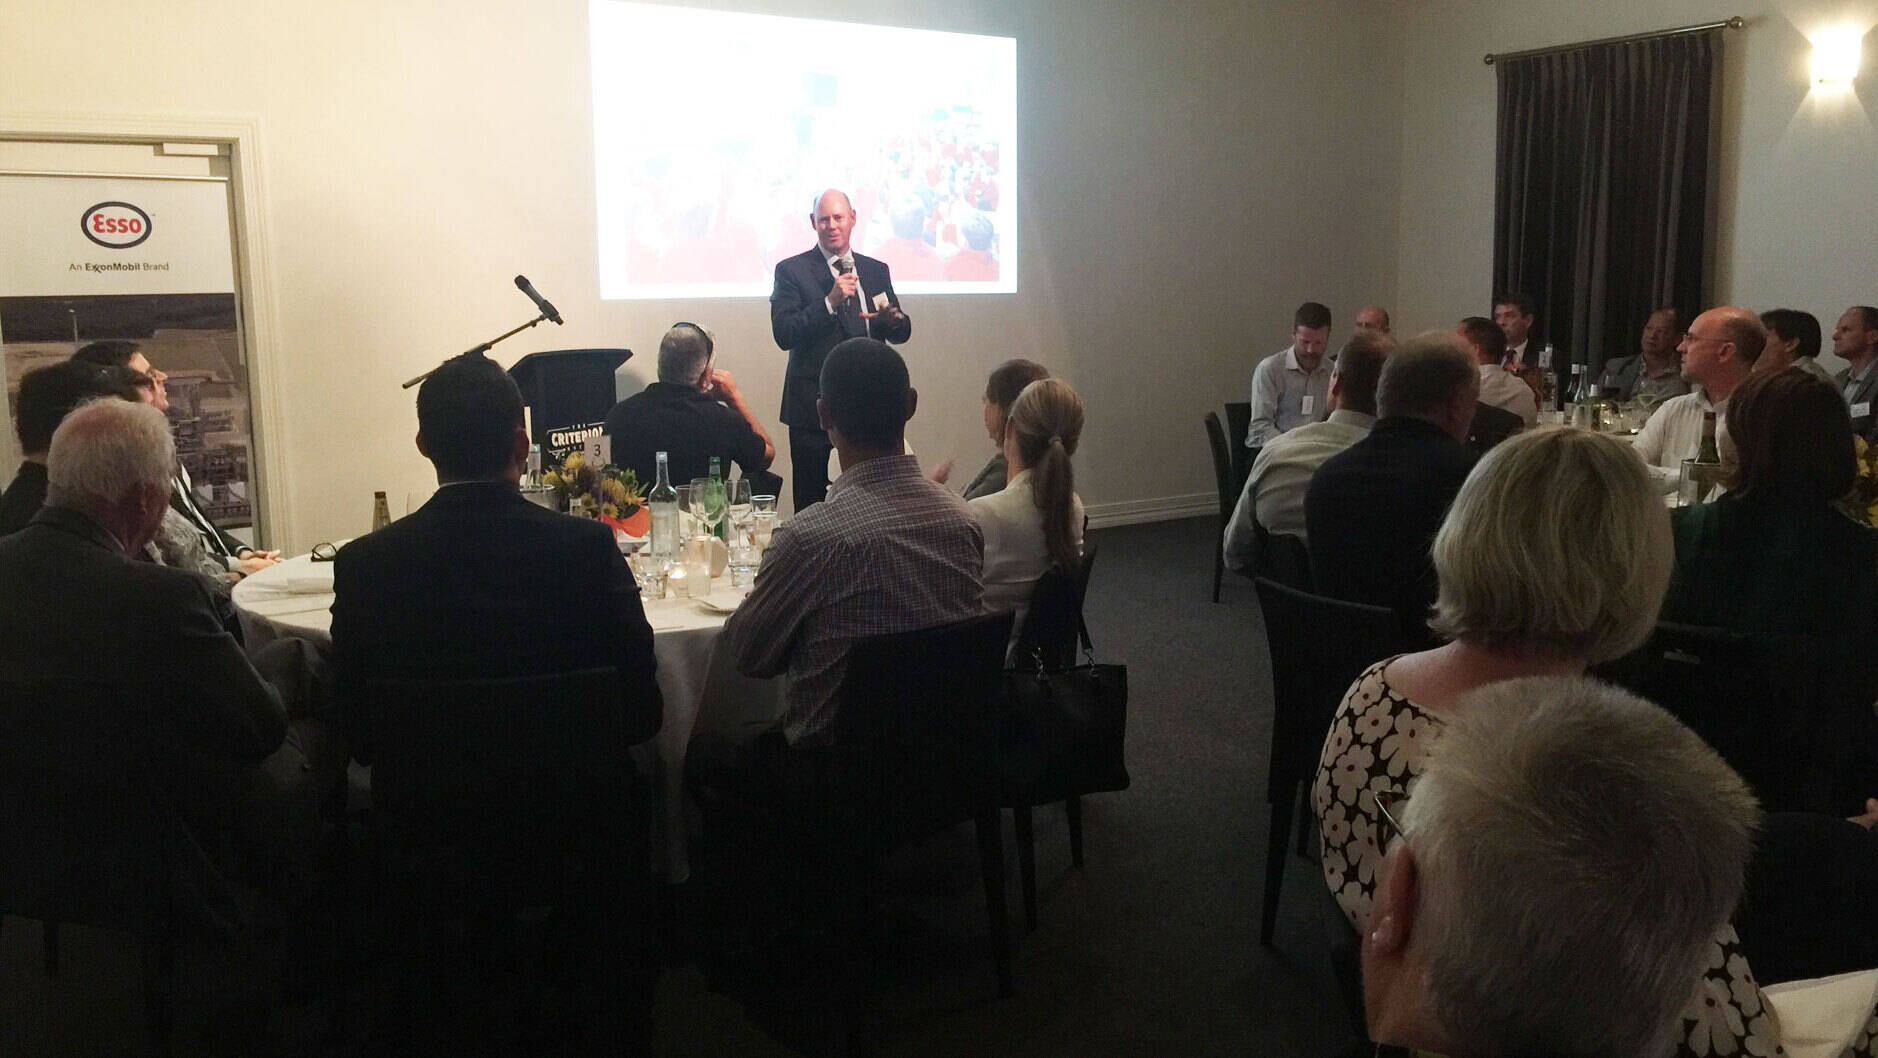 Image Photo— Offshore Operations Manager Geoff Humphreys speaks at the Gippsland community dinner.